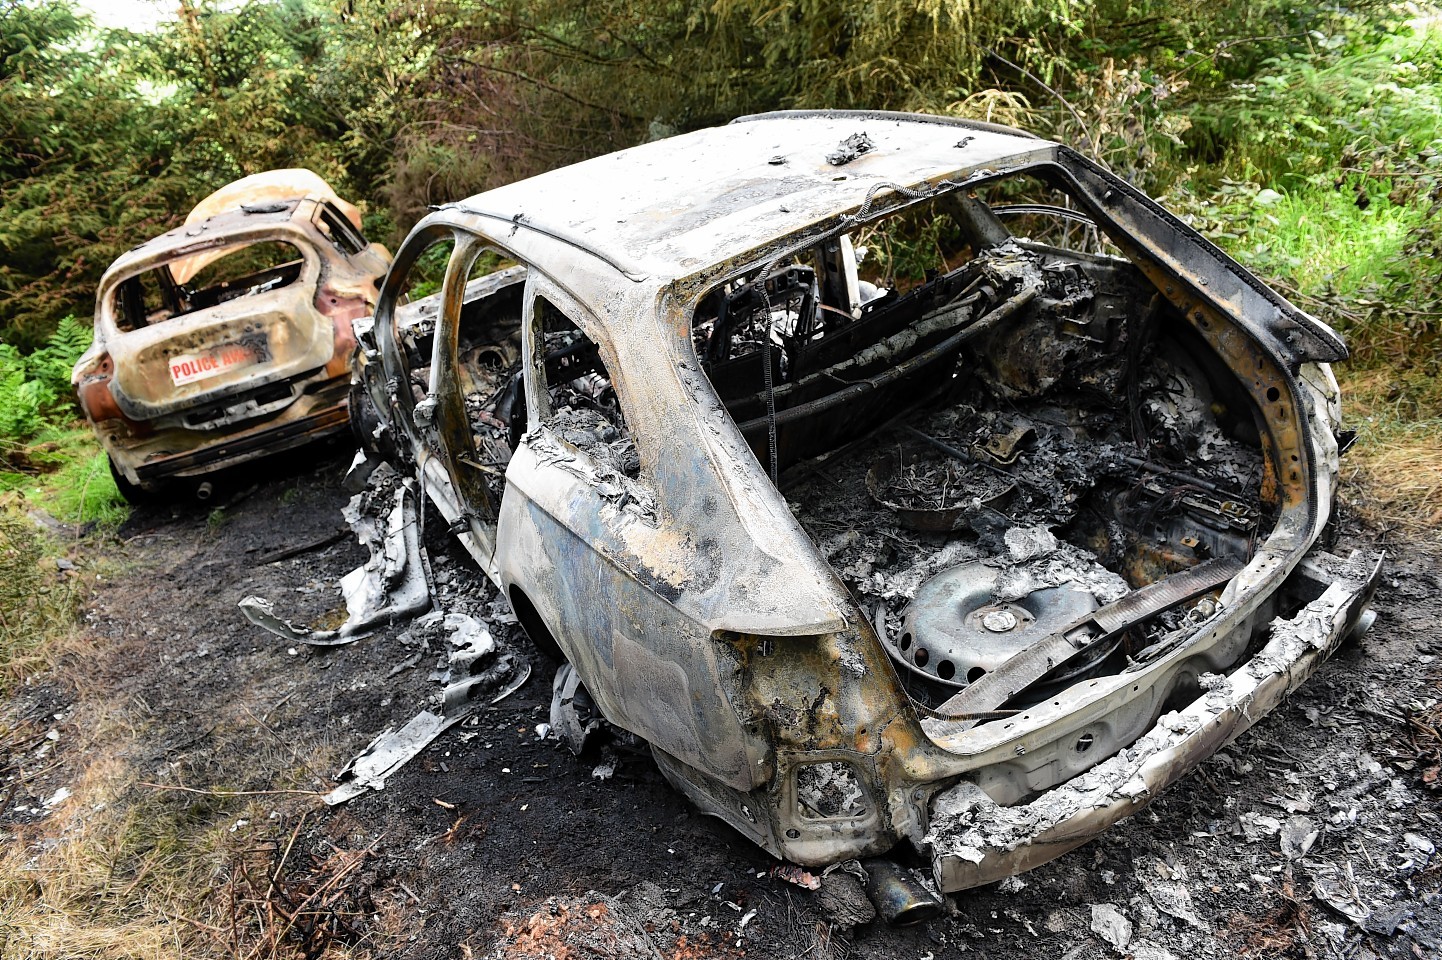 Two car stolen and burned in Hazlehead, Aberdeen